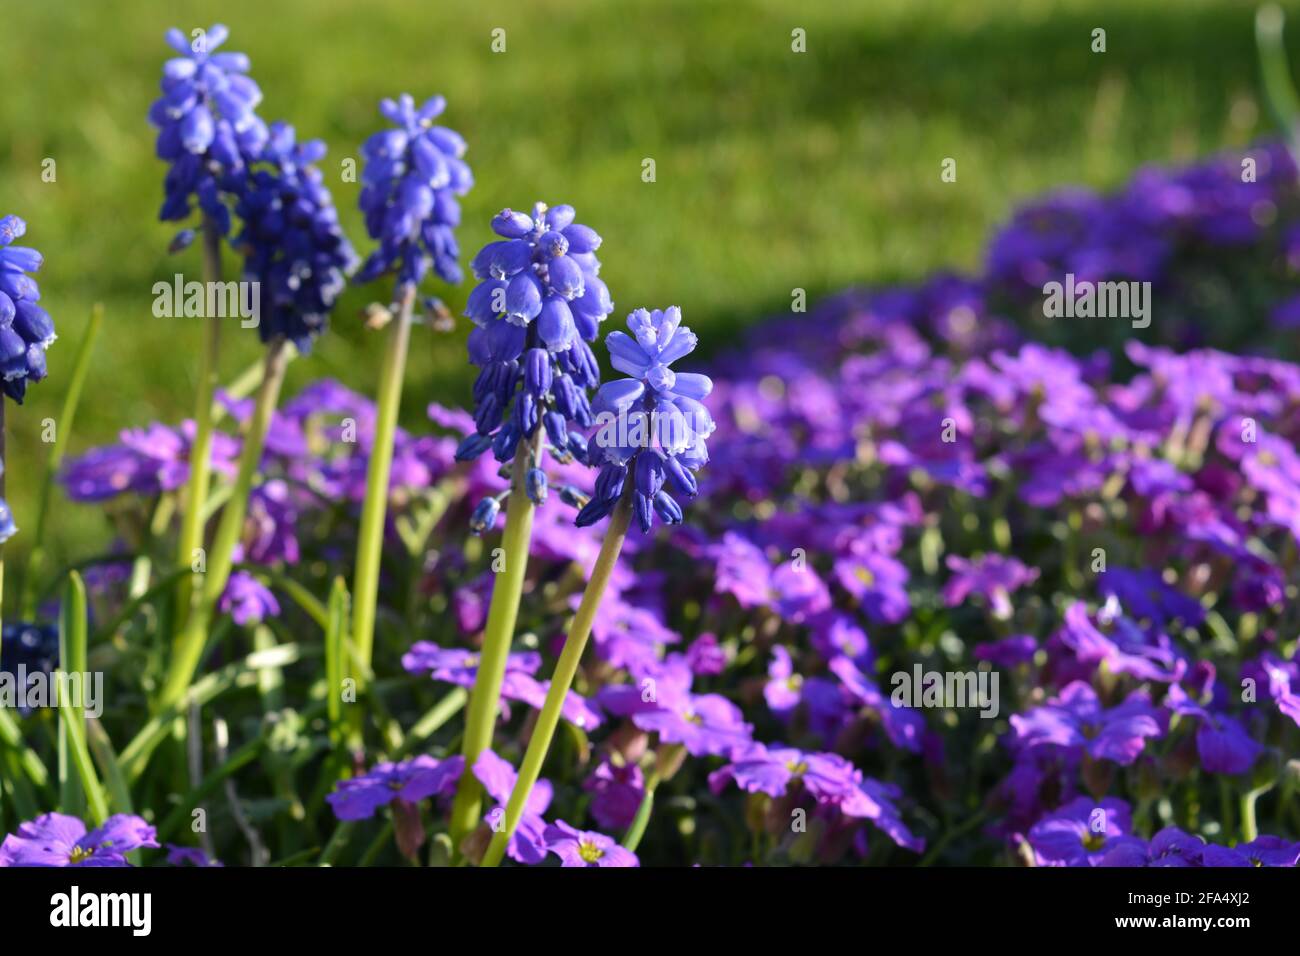 Muscari Blue Spike flowers with carpet of purple Aubrieta Carnival in a spring flowerbed. Selective focus and shallow depth of field. Stock Photo